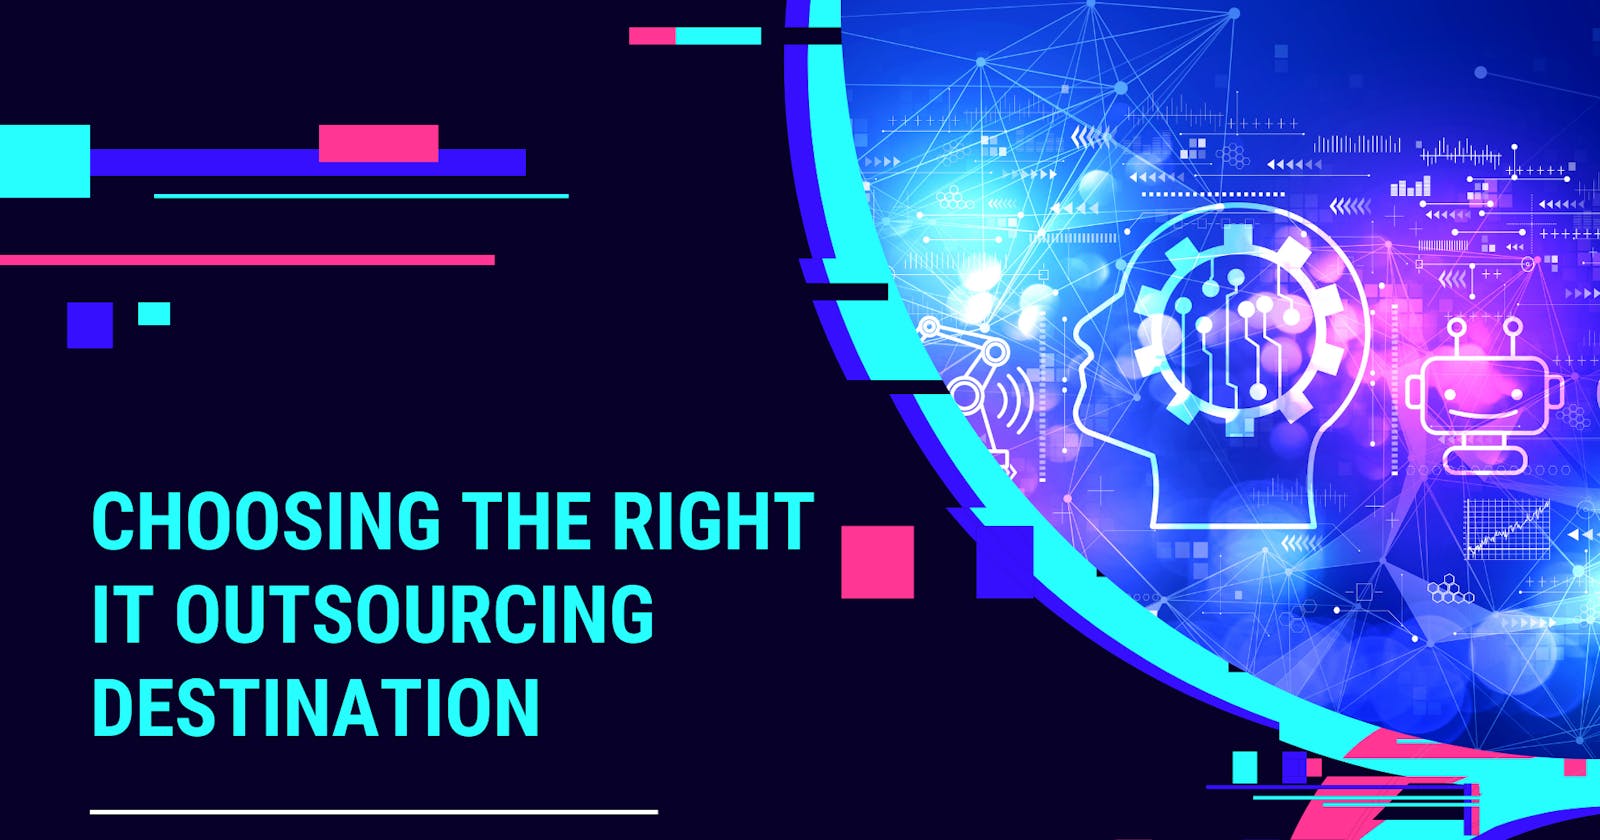 Choosing the Right IT Outsourcing Destination: A Comprehensive Comparison of Top 6 Countries